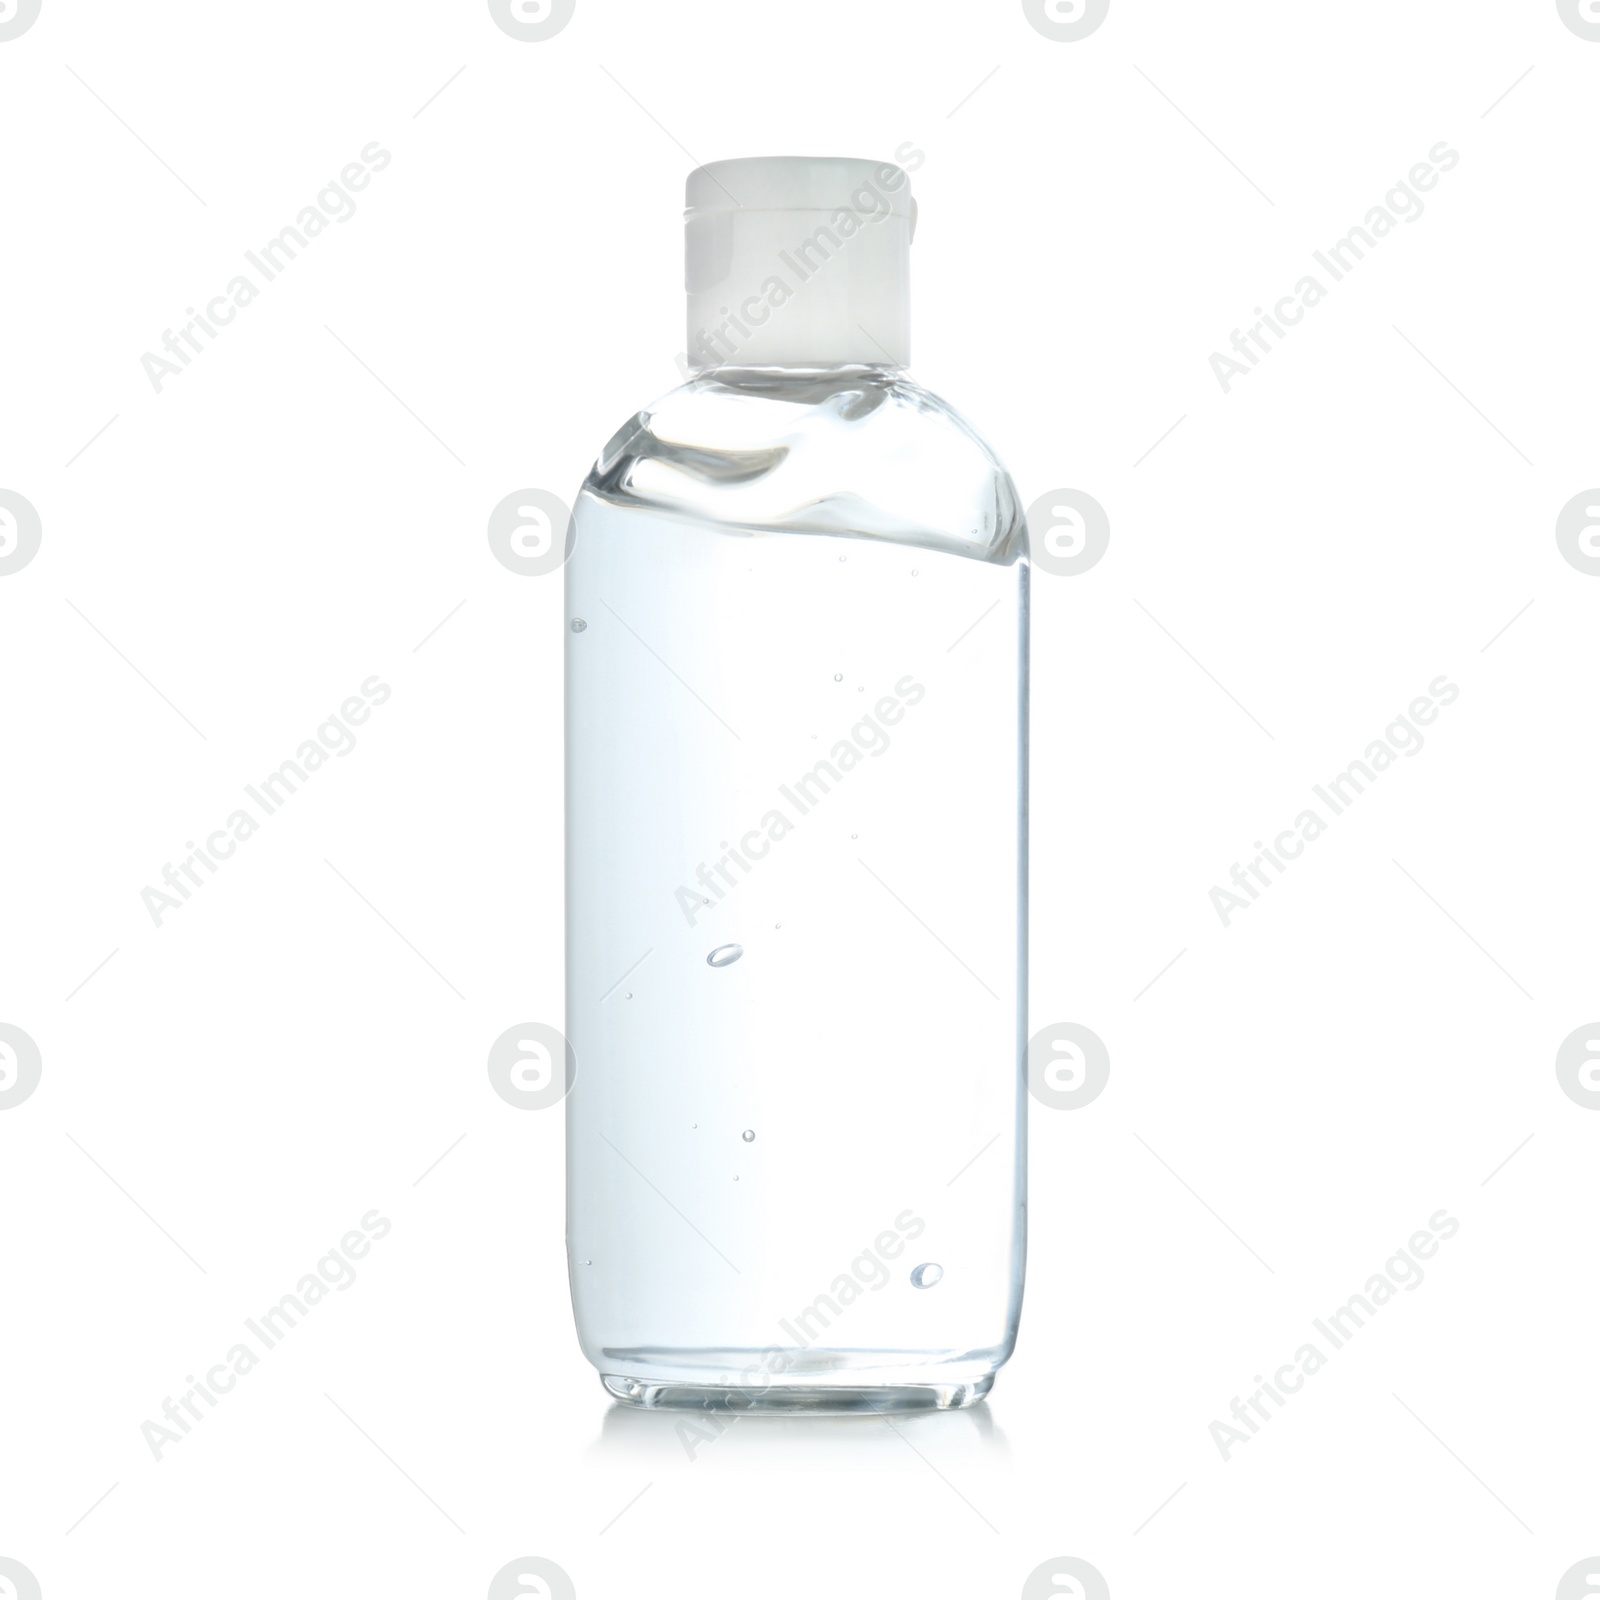 Photo of Bottle of antibacterial hand gel on white background